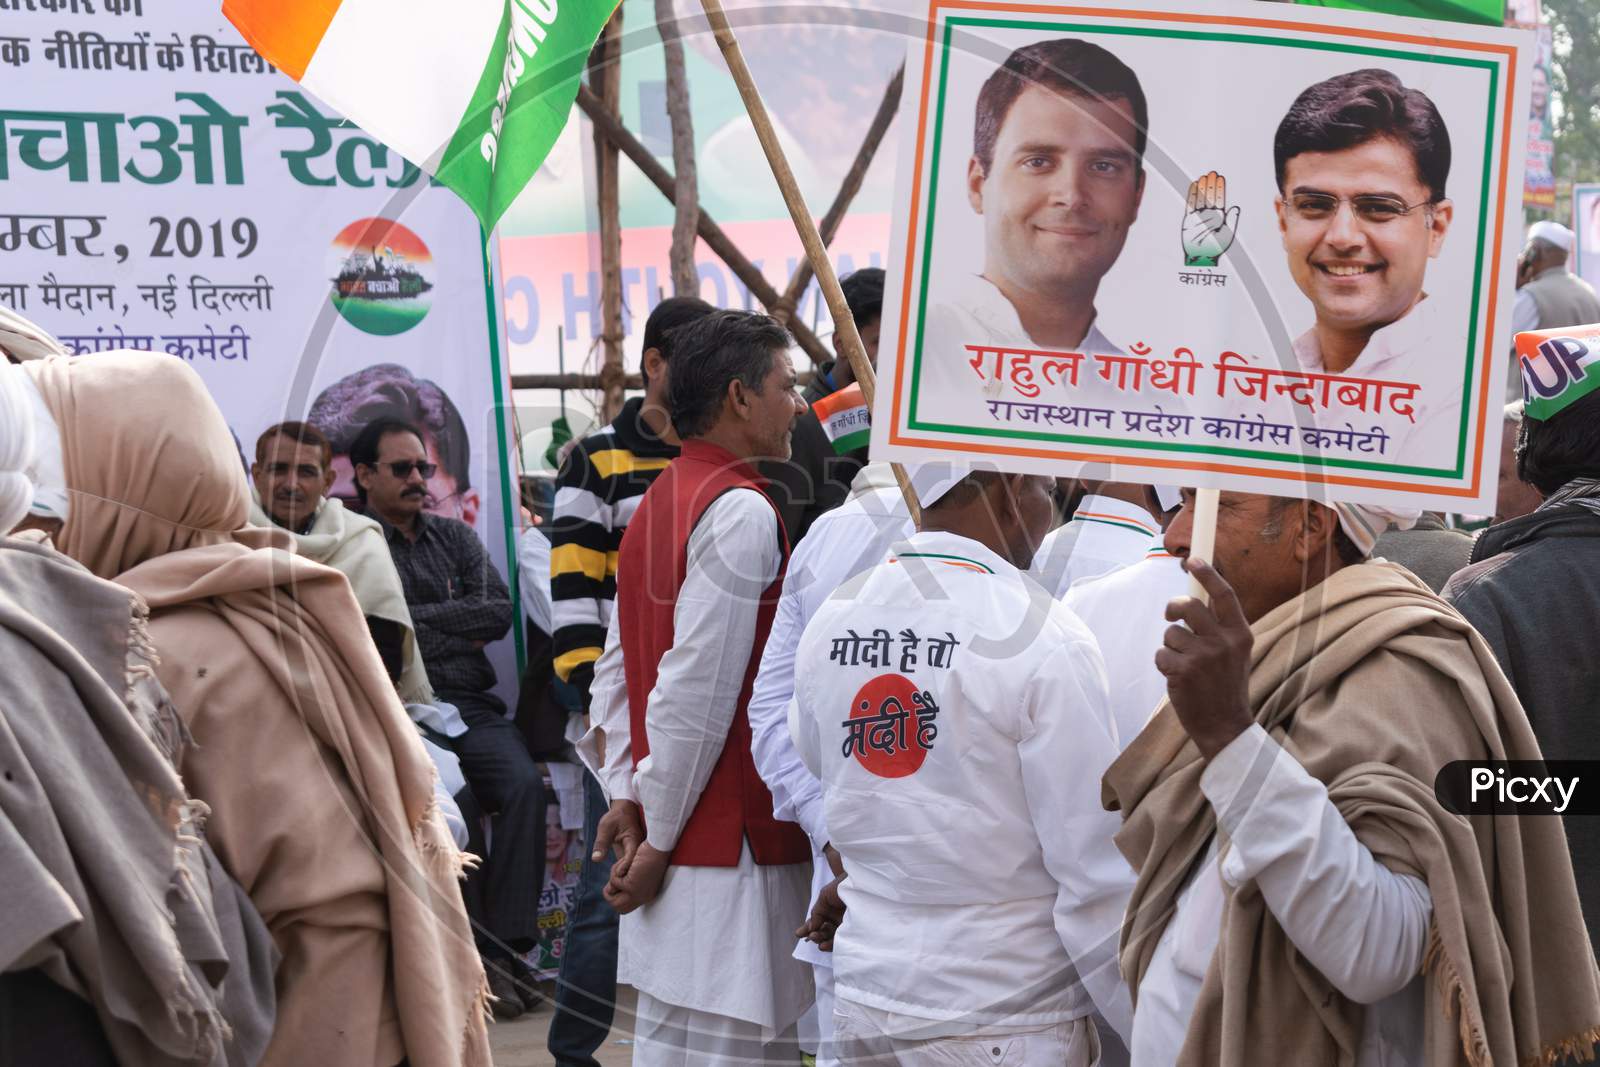 photos of Rahul Gandhi and Sachin Pilot in a Poster during 'Bharat Bachao' rally by Congress in Delhi to highlight Modi govt failures